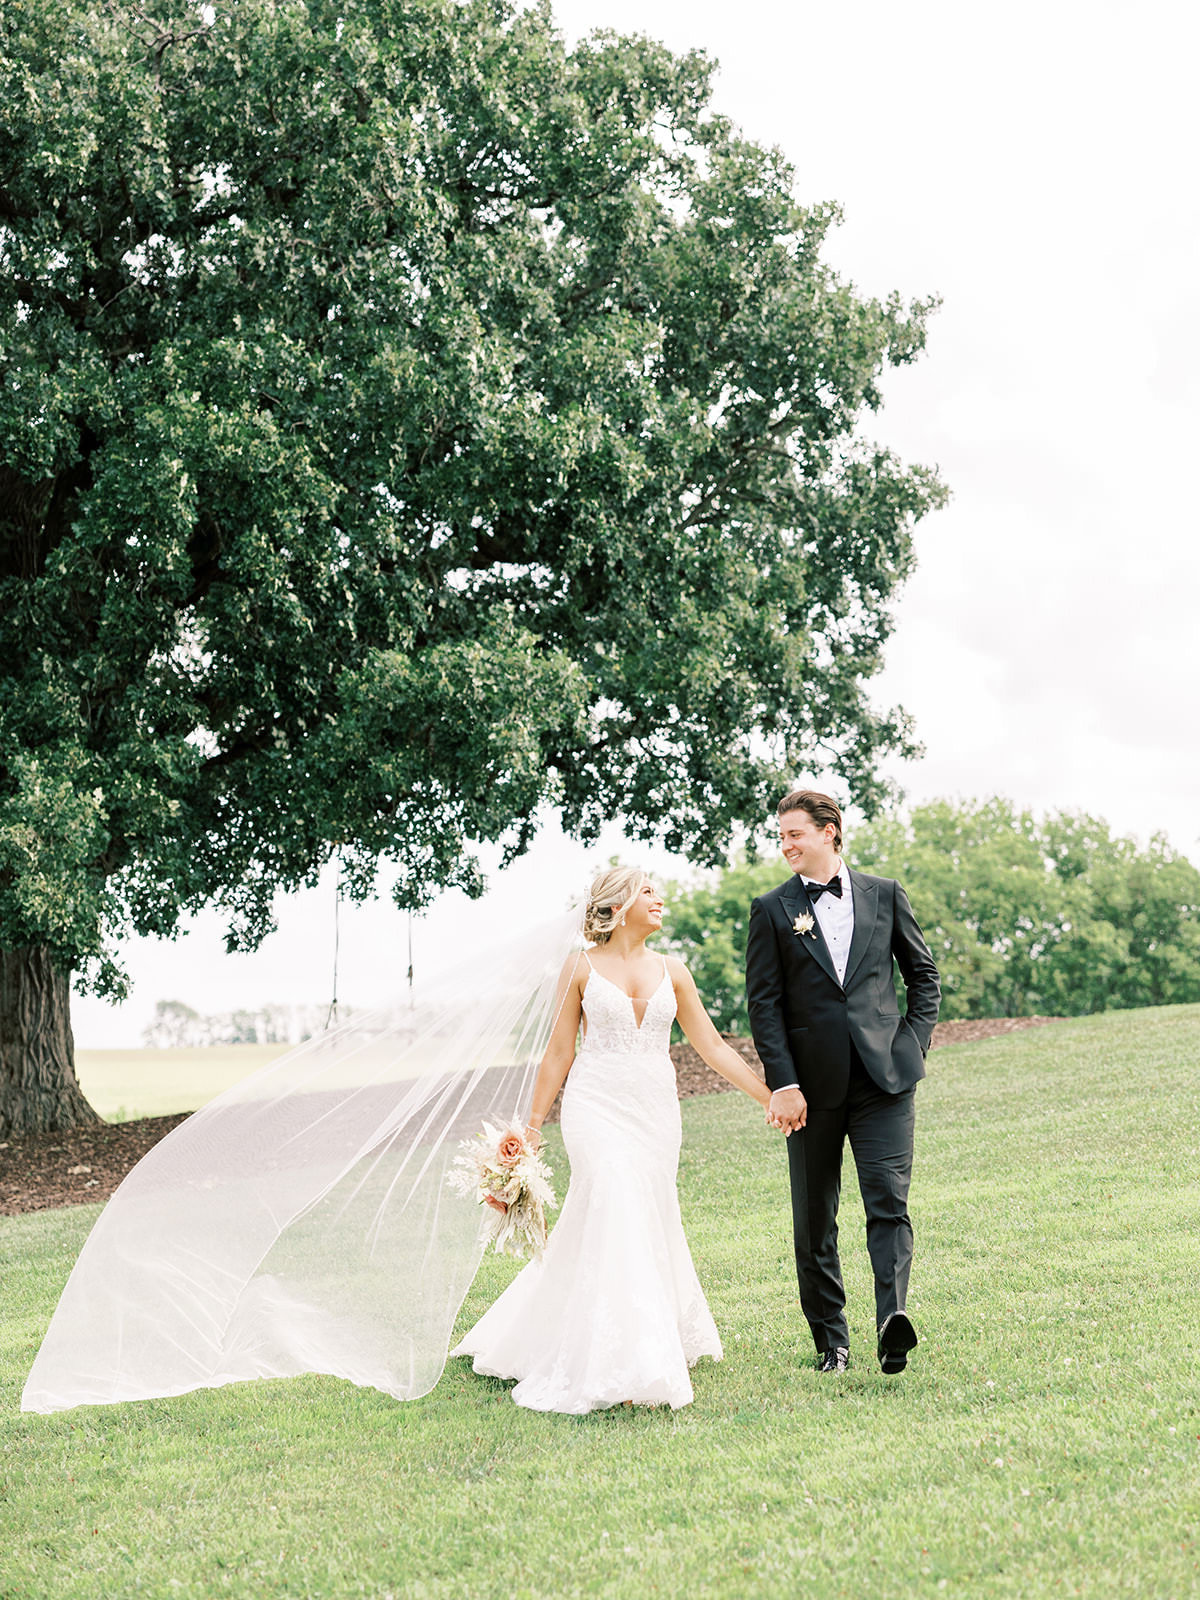 Bride and groom hold hands and walk across expansive field while veil blows in the wind